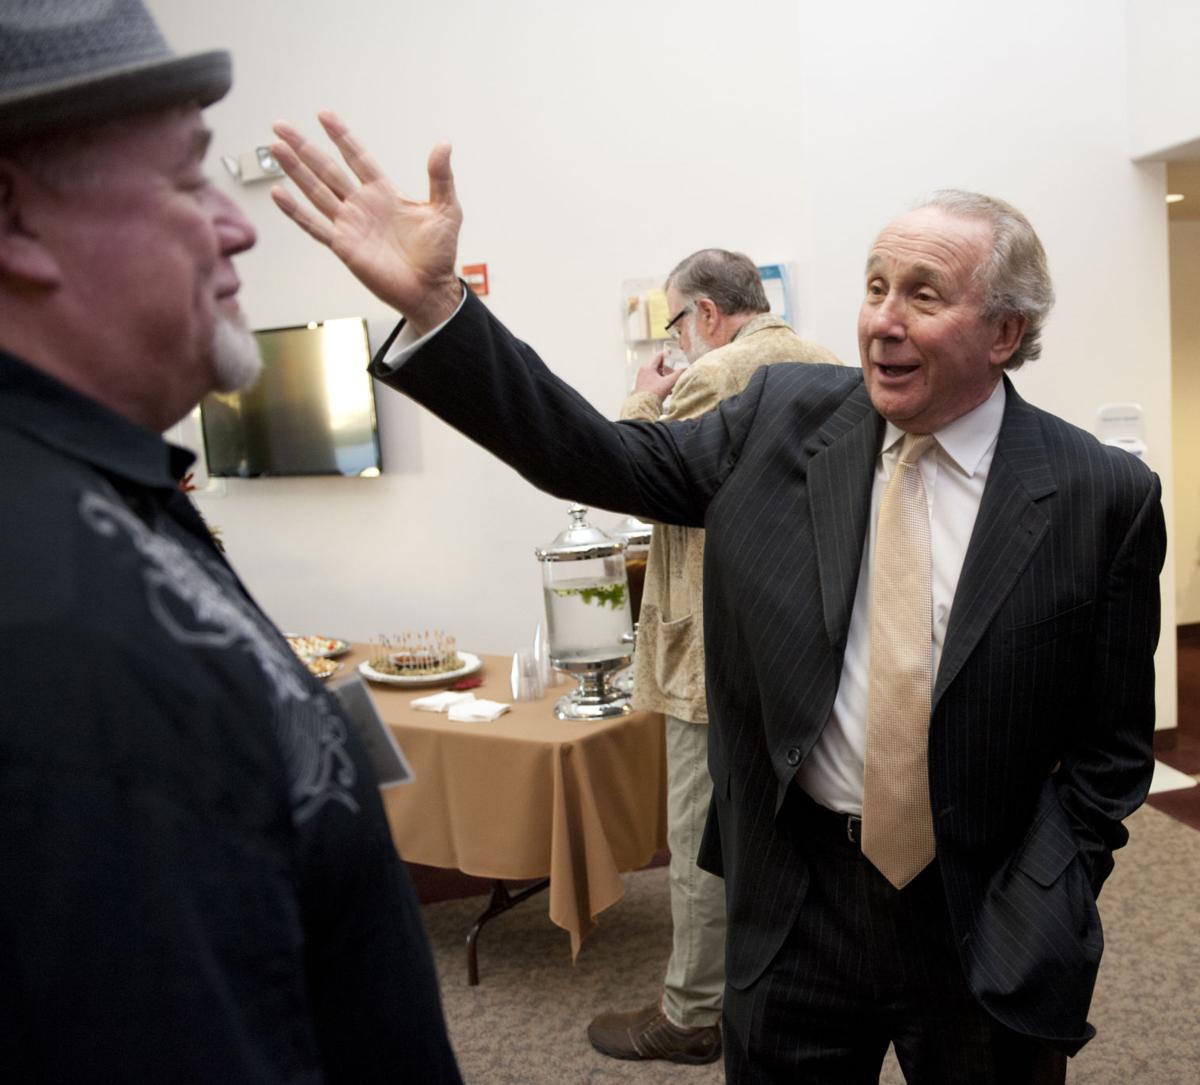 Michael Reagan Son Of Ronald Reagan Talks About His Father And His Thoughts On America In Lodi